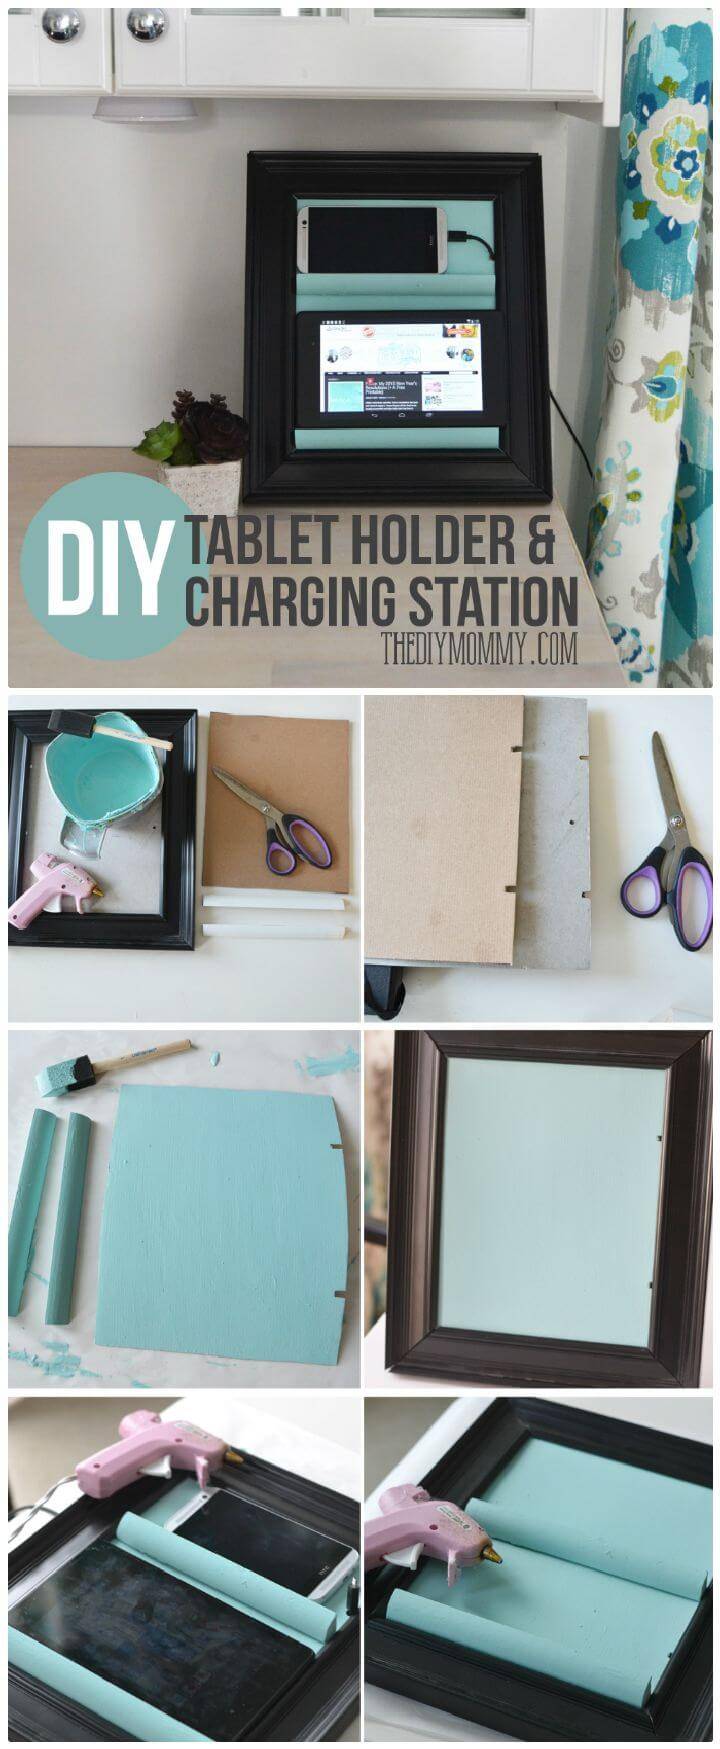 40 Best Diy Charging Station Ideas Easy Simple Unique Diy Crafts,Cleaning Bedroom Checklist